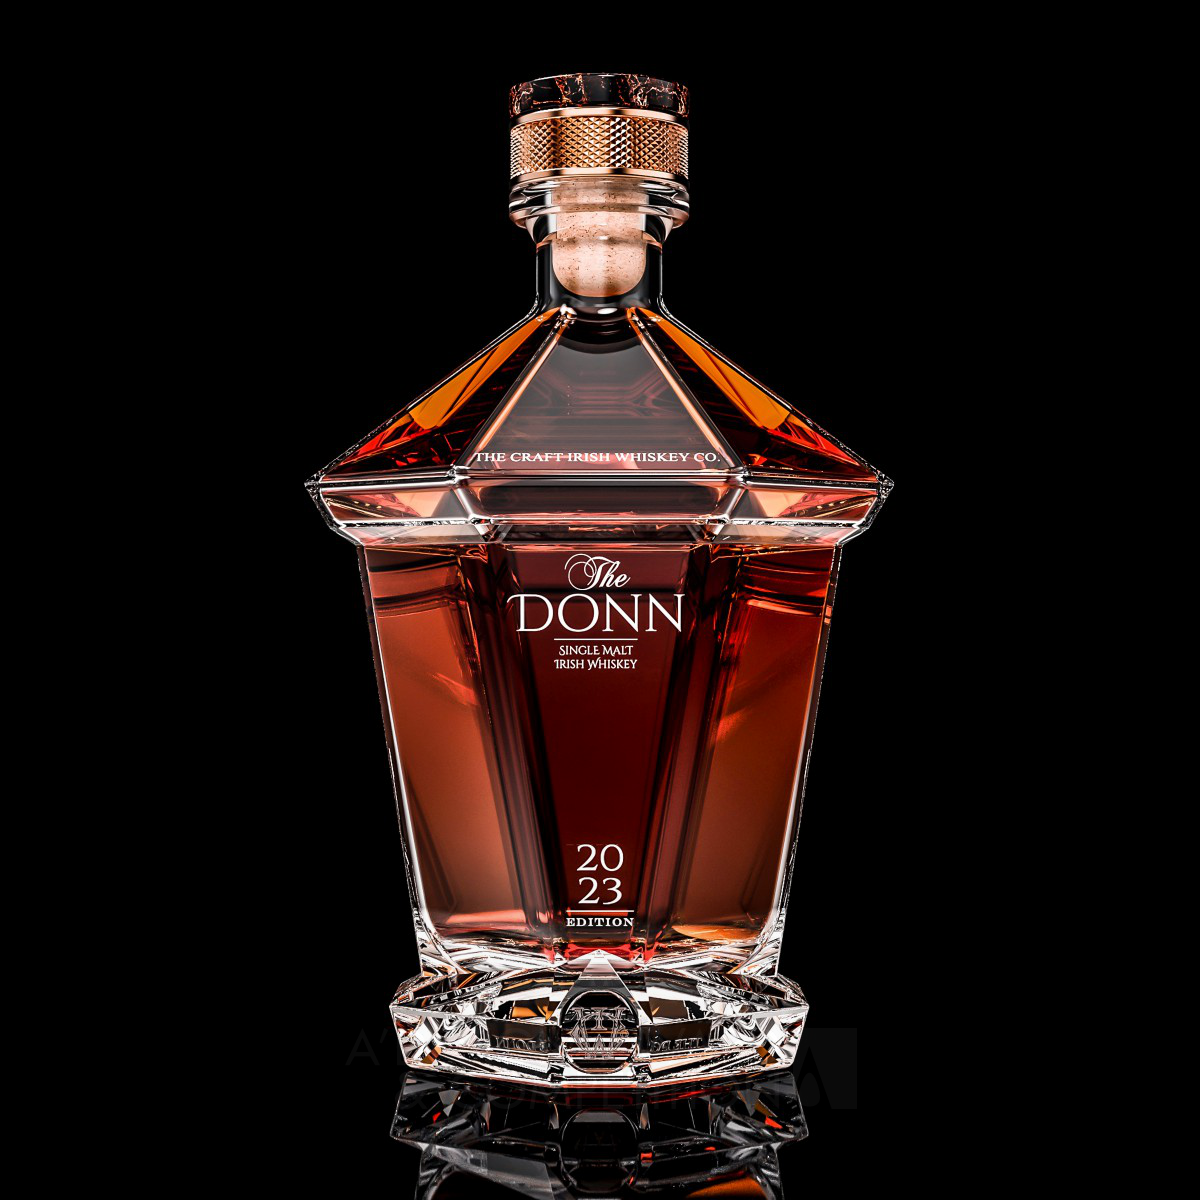 Tiago Russo wins Golden at the prestigious A' Packaging Design Award with The Donn Single Malt Irish Whiskey.